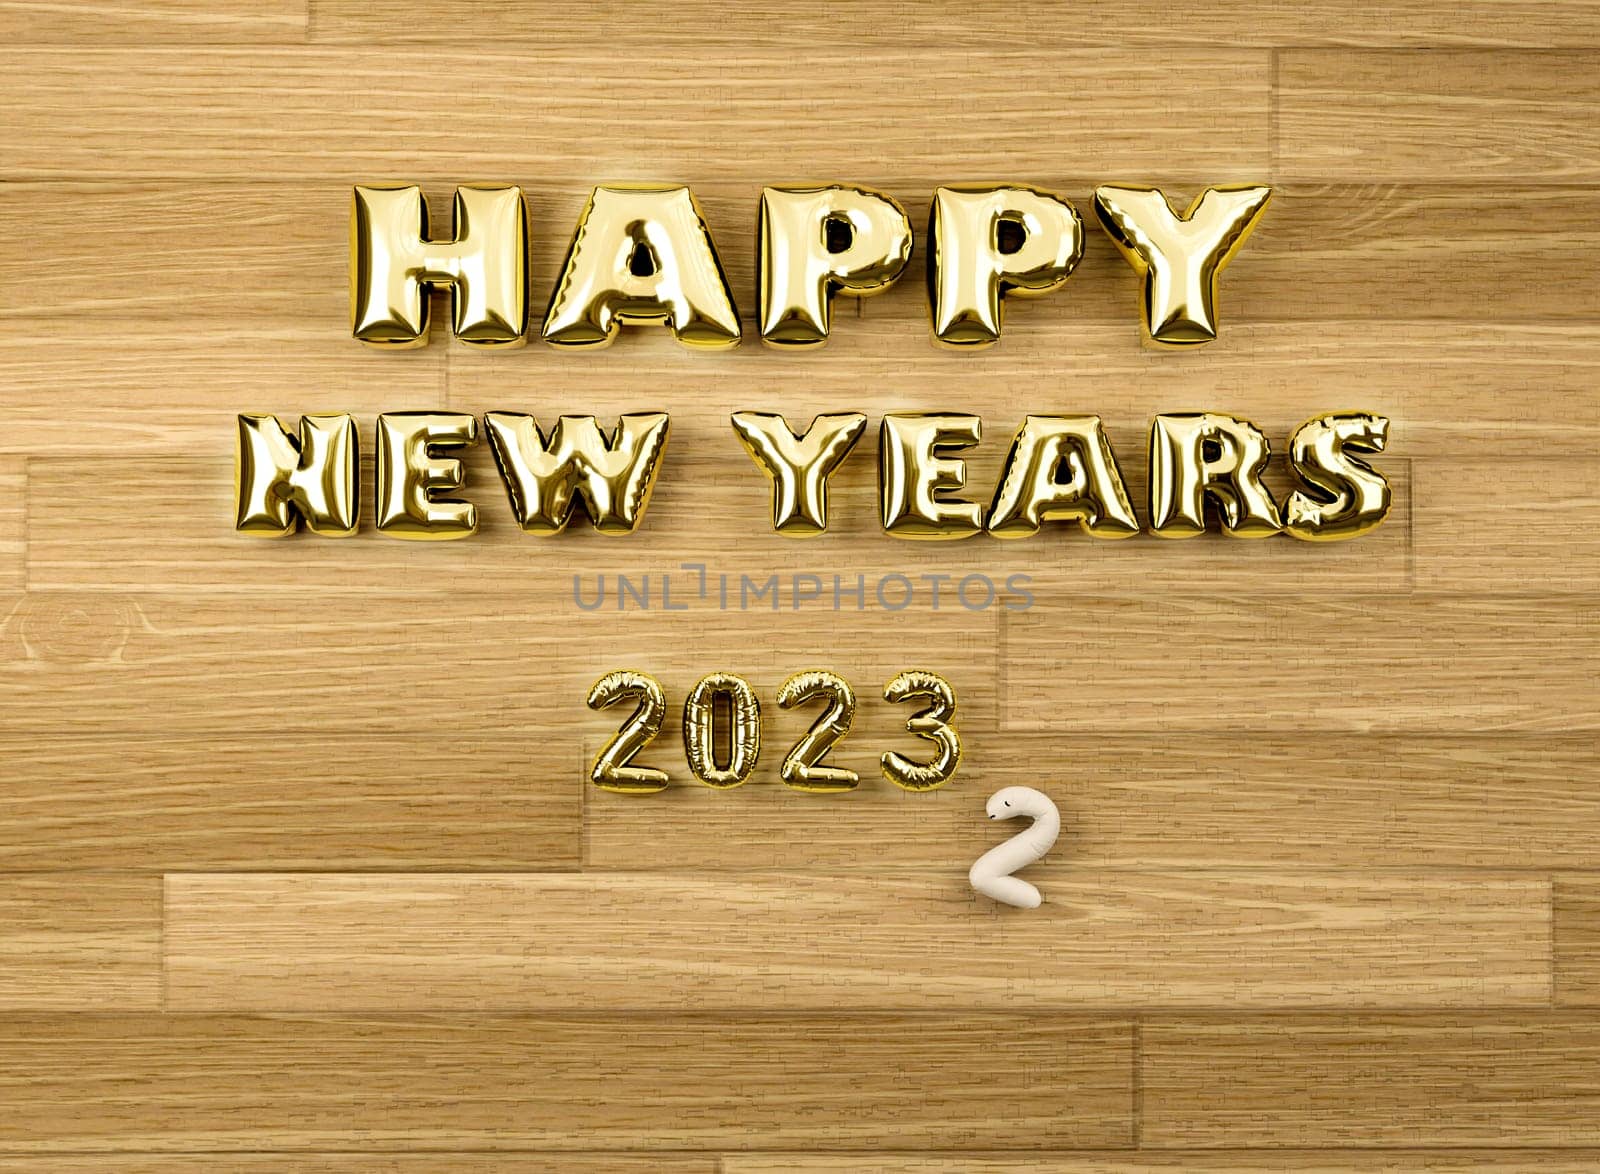 Merry Christmas and New Year background 3D rendering. Golden shiny realistic 3d inscription Merry Christmas on wooden background for Greeting card, banner, poster.